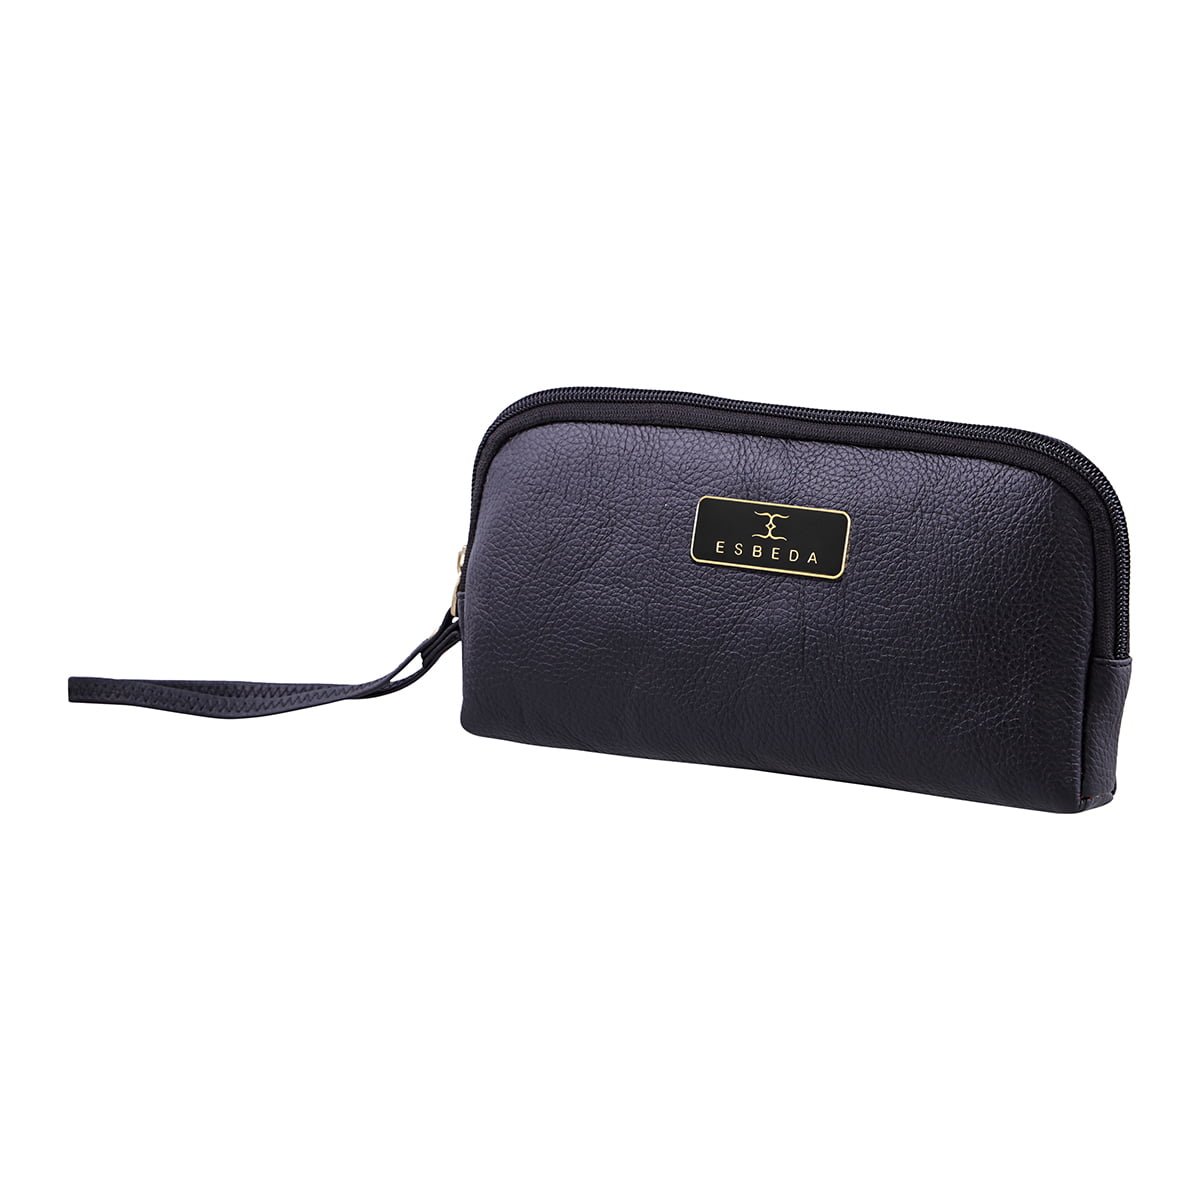 ESBEDA Black Color Solid Pu Synthetic Material Pouch For Womens